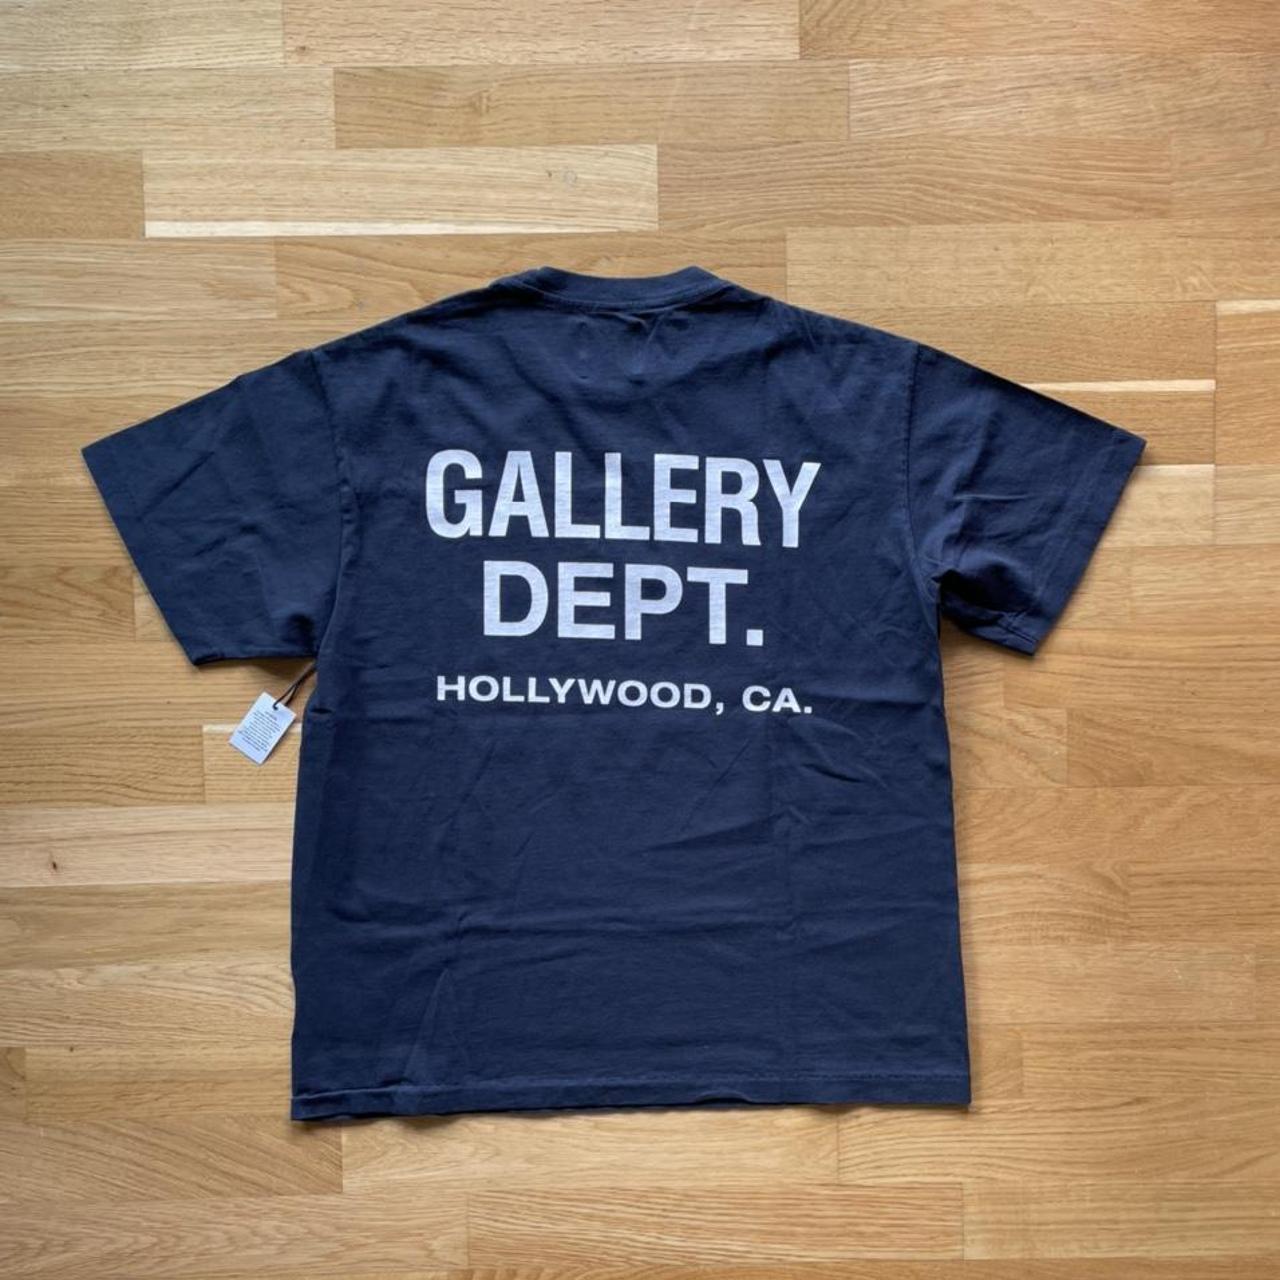 Gallery Dept. Men's Navy and White T-shirt